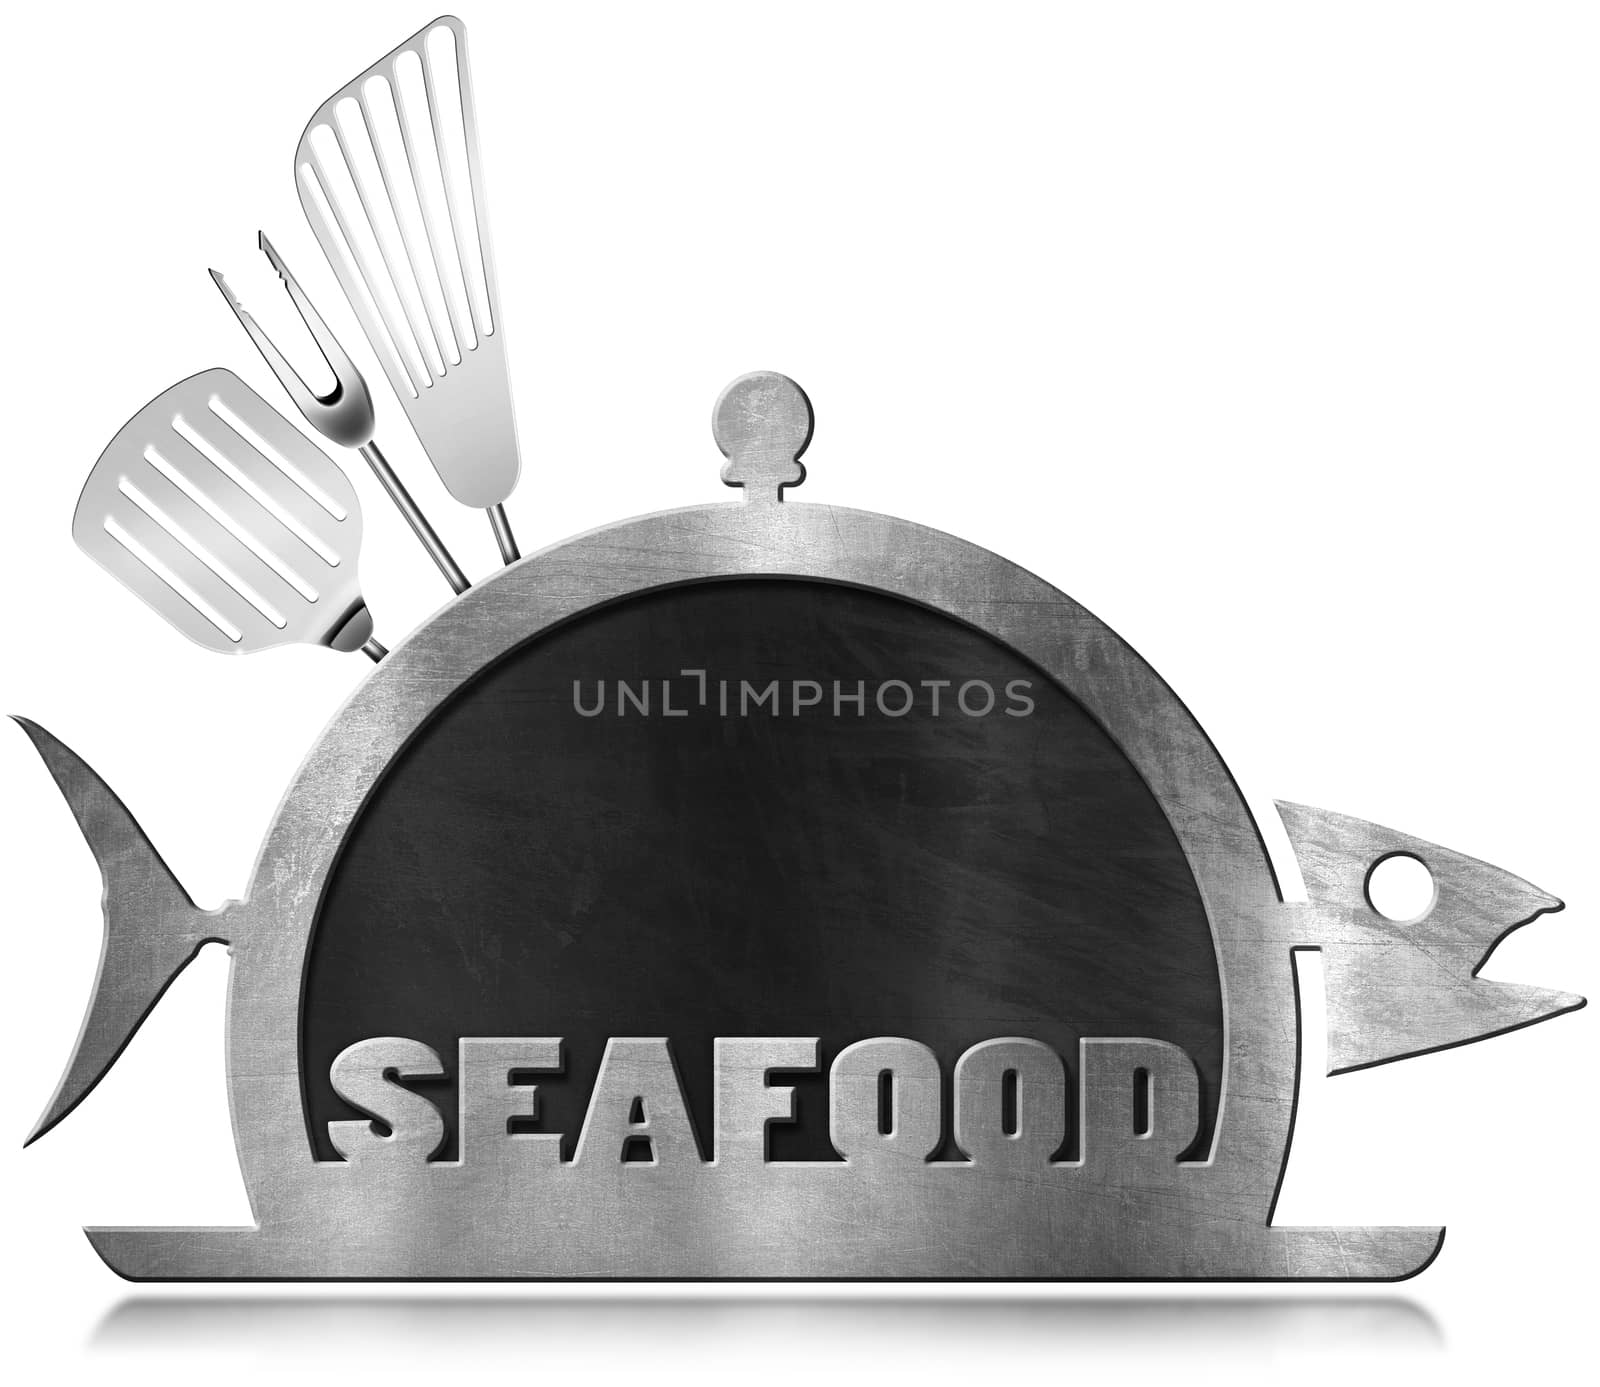 Blackboard with steel frame in the shape of fish and serving dome with kitchen utensils and text Seafood. Isolated on white background